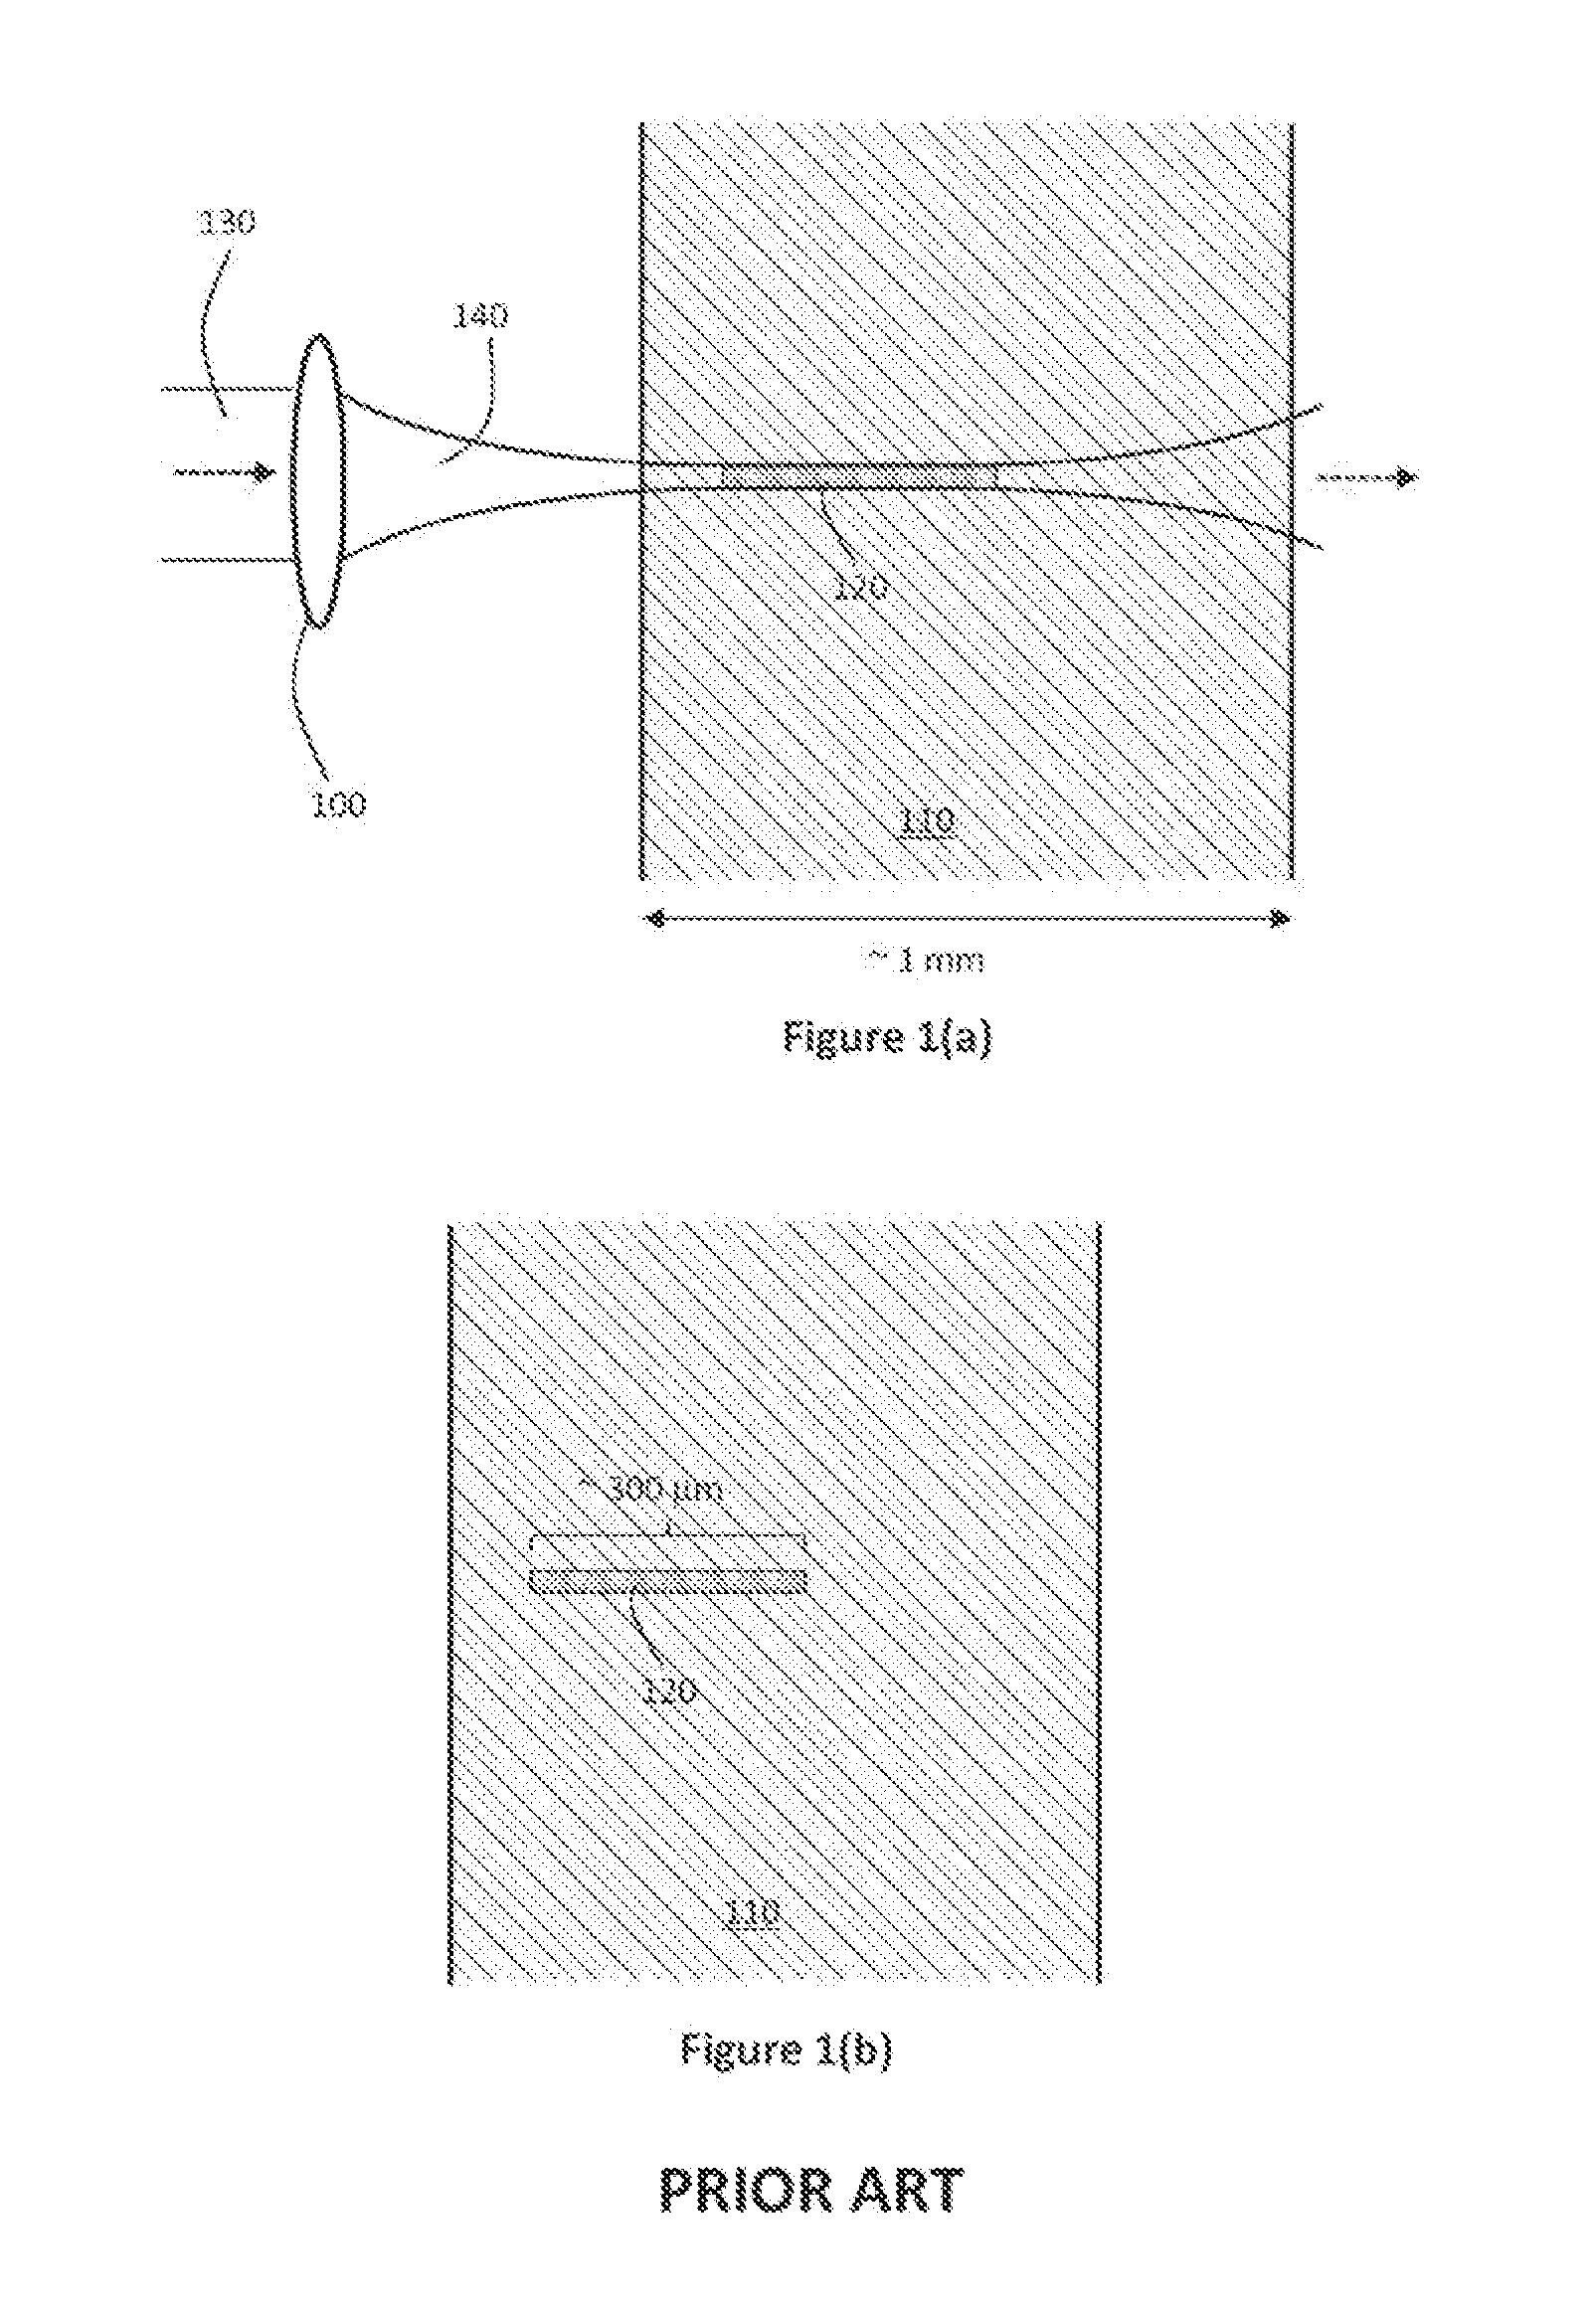 System for performing laser filamentation within transparent materials